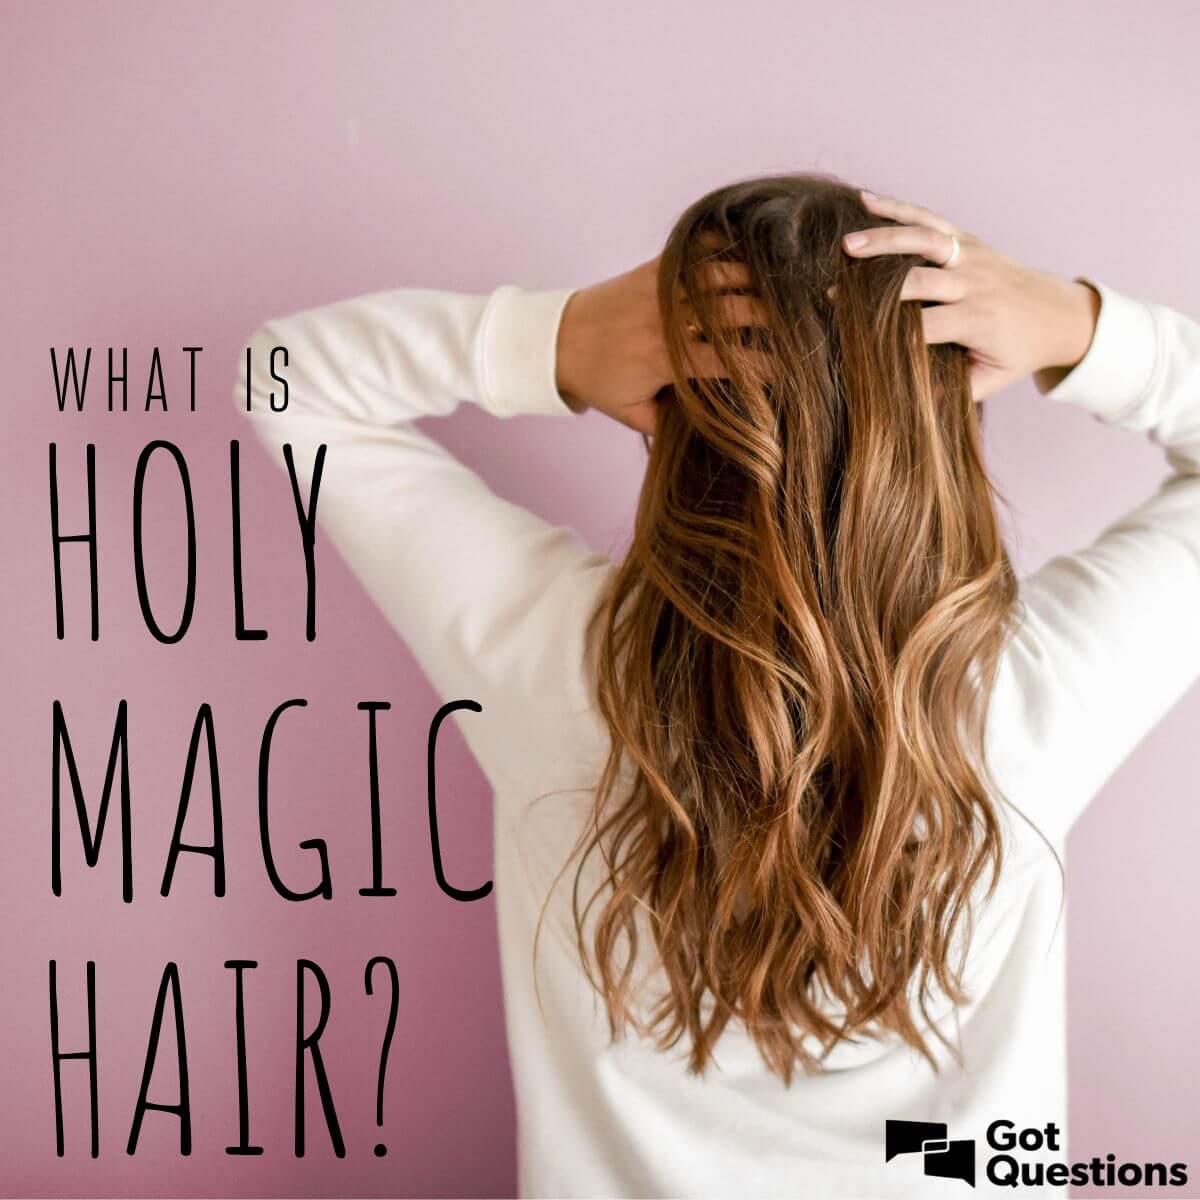 What is holy magic hair? 